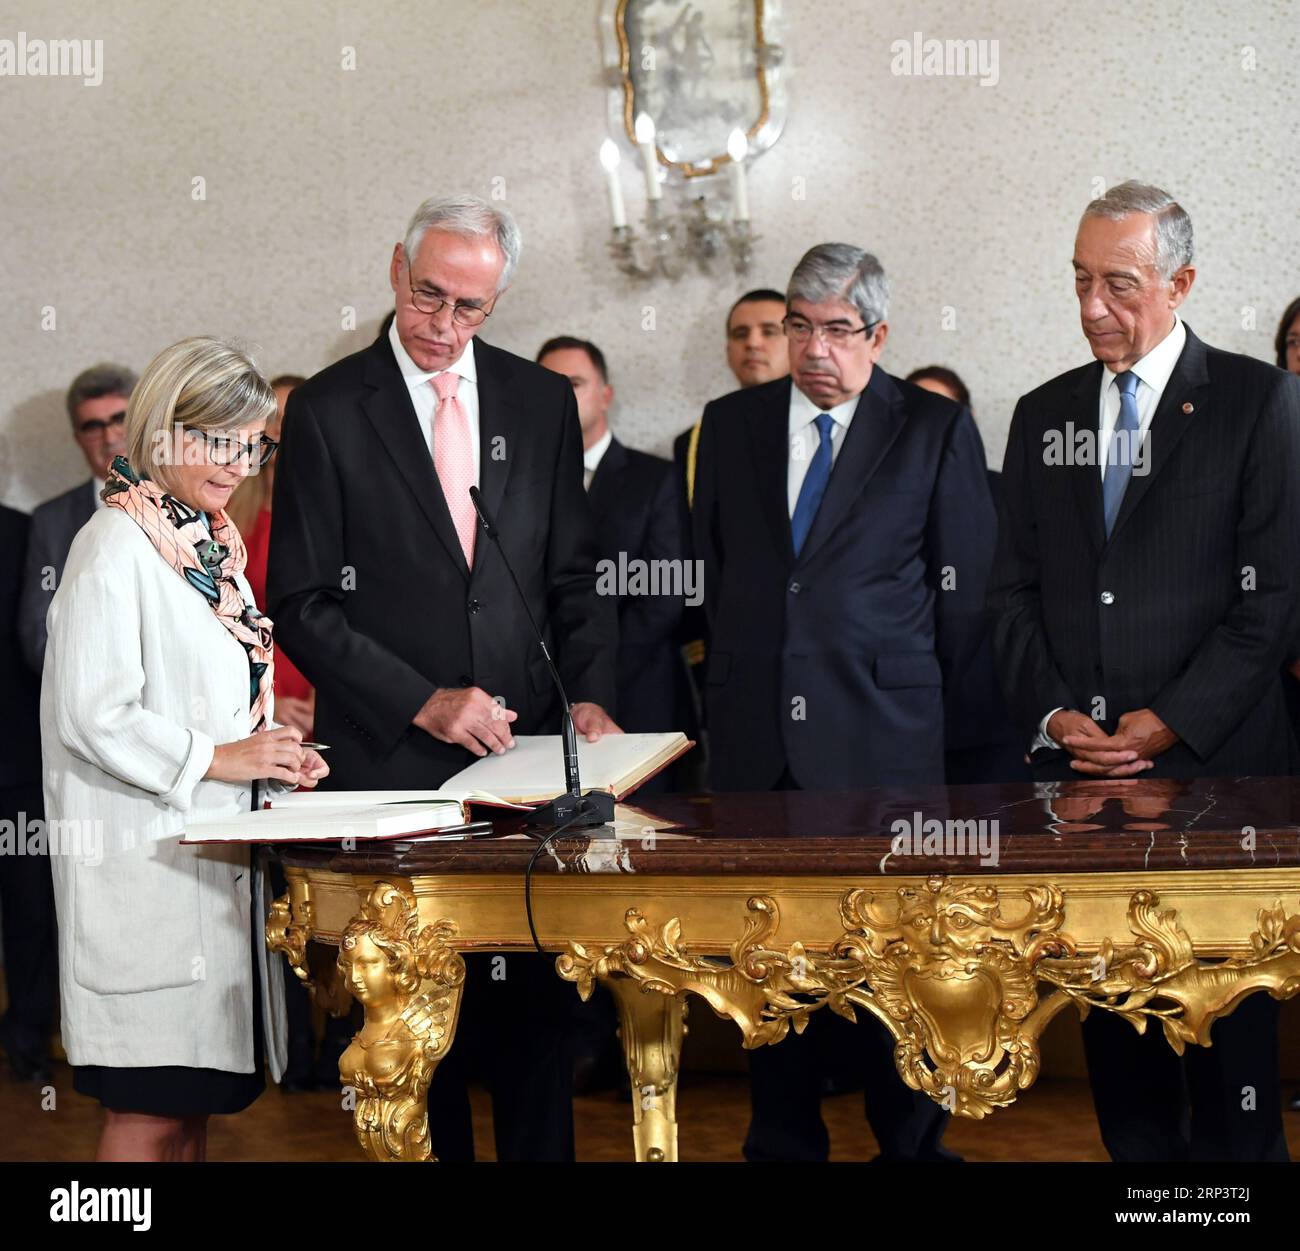 (181015) -- LISBON, Oct. 15, 2018 -- Newly appointed Portuguese Health Minister Marta Temido (1st L) attends a swearing-in ceremony of new ministers in Lisbon, Portugal, on Oct. 15, 2018. ) (hy) PORTUGAL-LISBON-CABINET-RESHUFFLE ZhangxLiyun PUBLICATIONxNOTxINxCHN Stock Photo